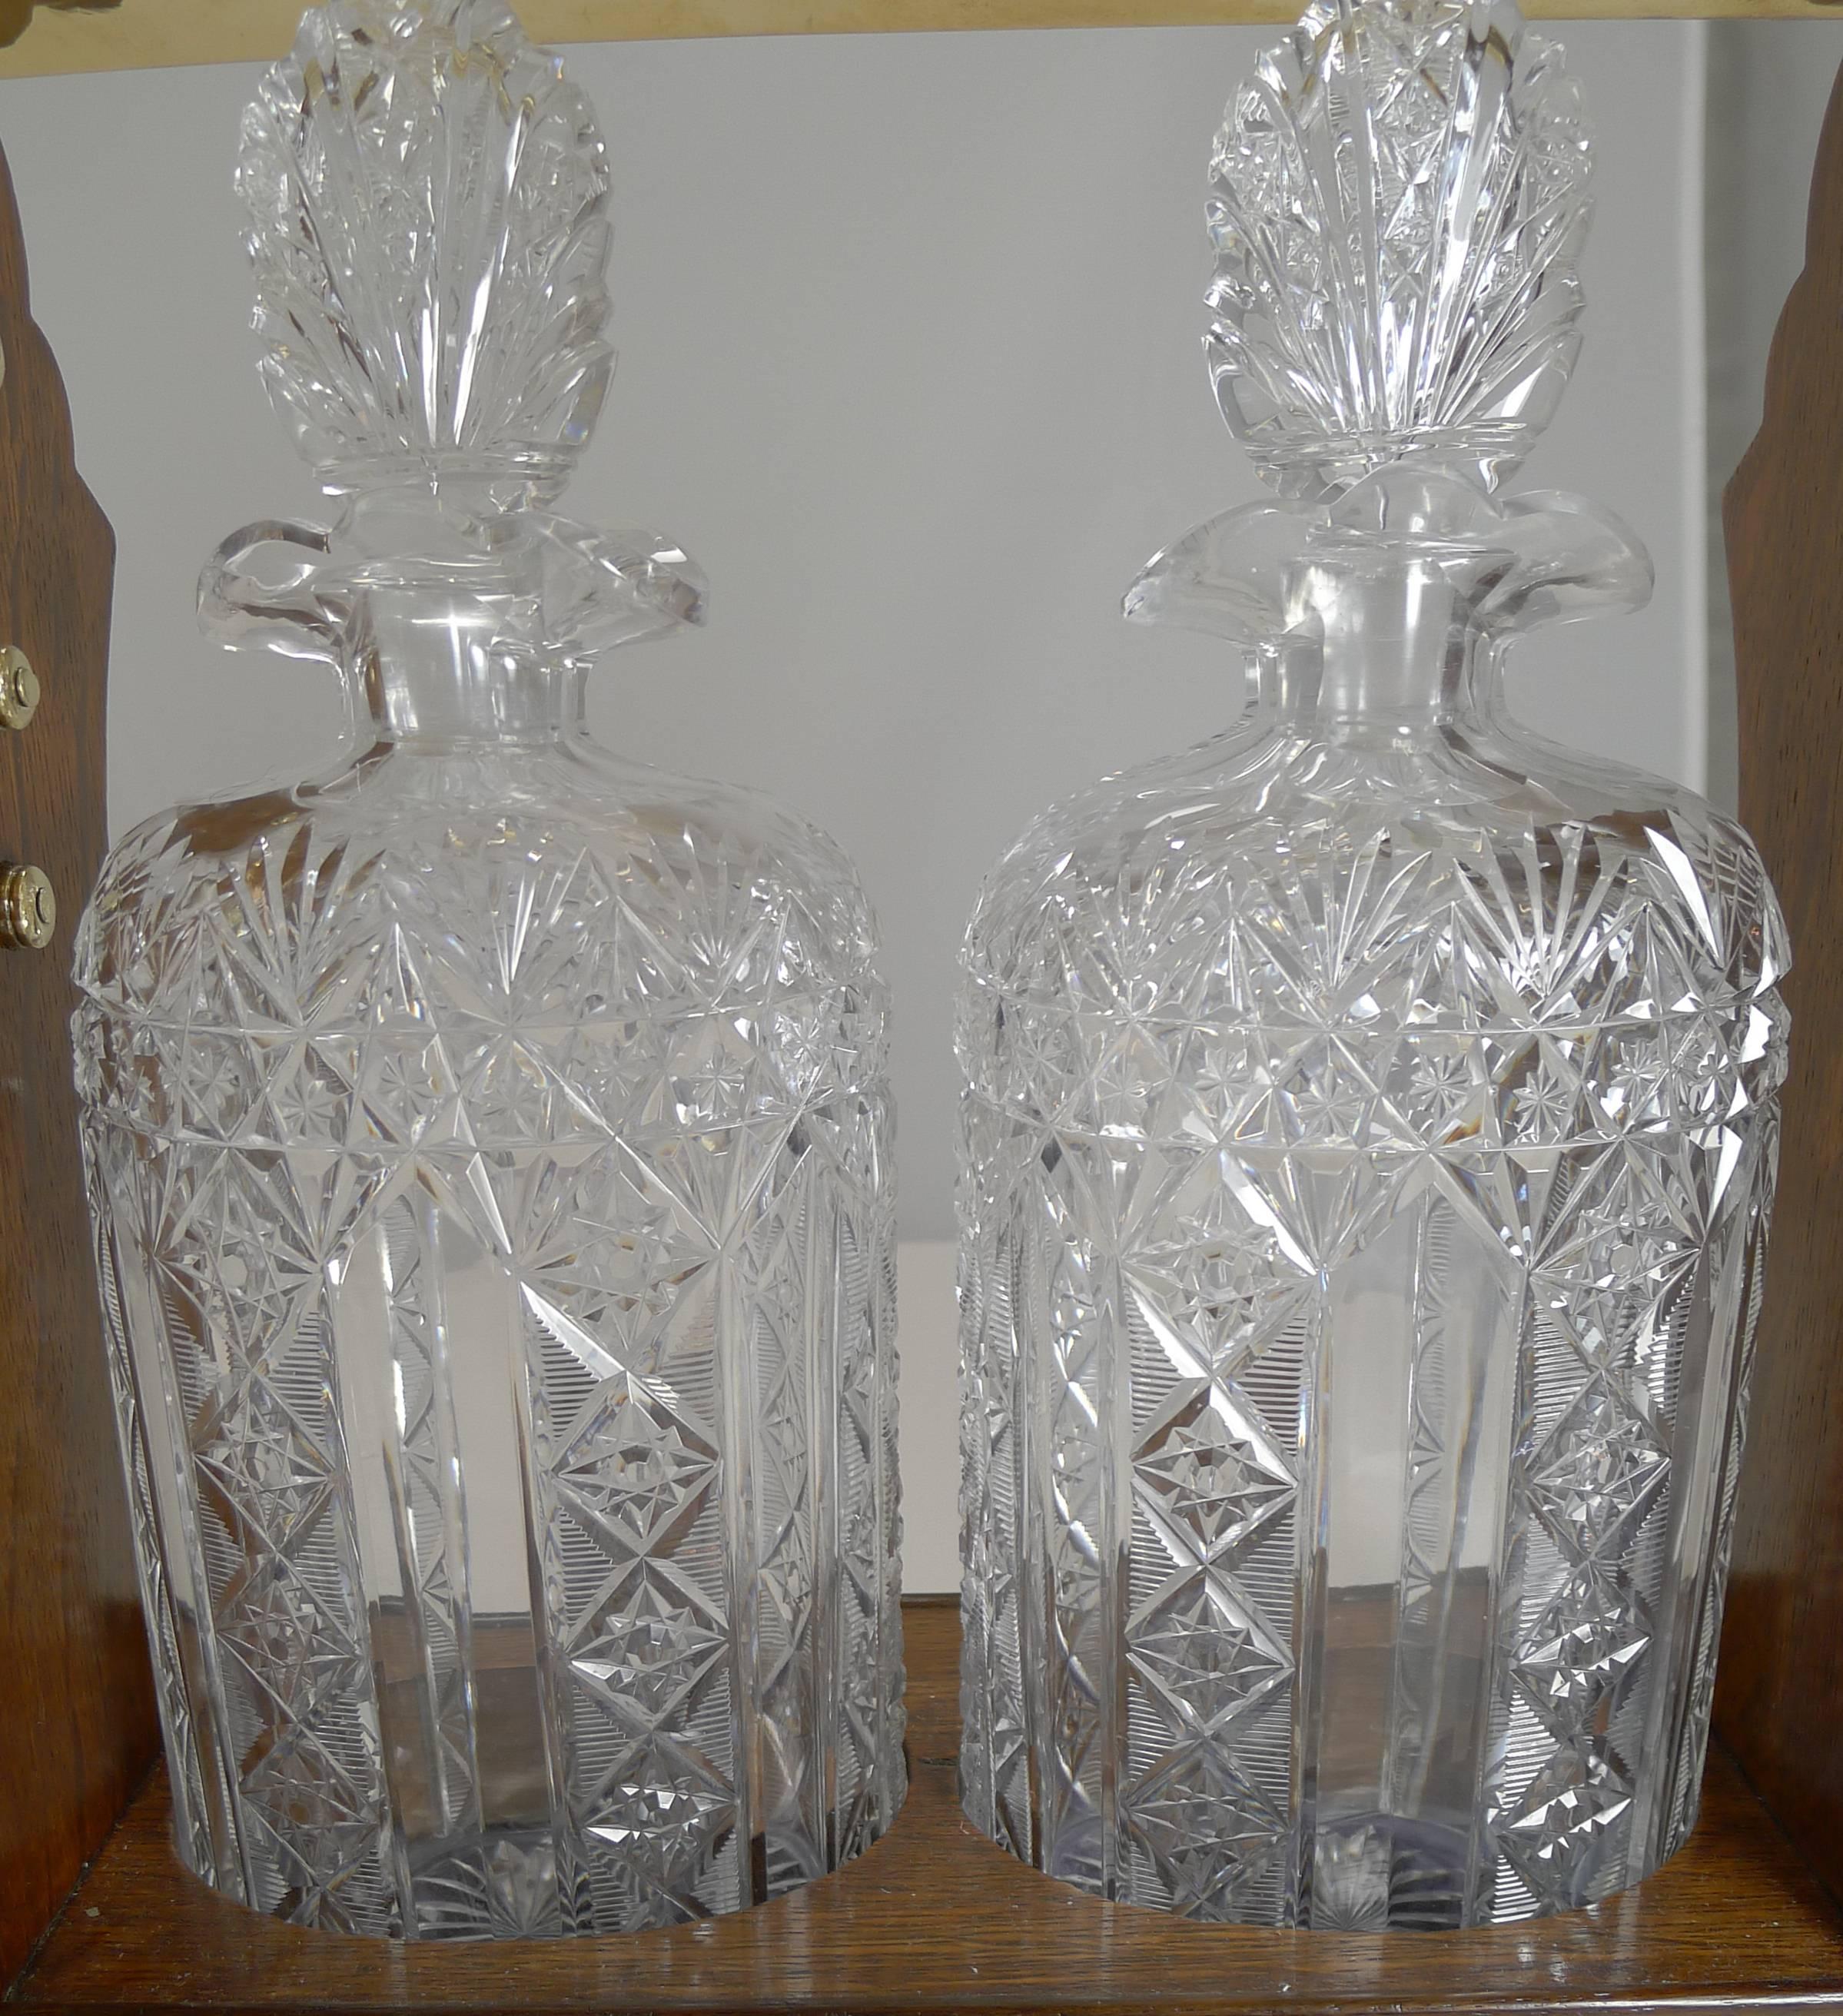 Late Victorian Antique English Tantalus Exceptional Cut Crystal Oval Decanters, circa 1890